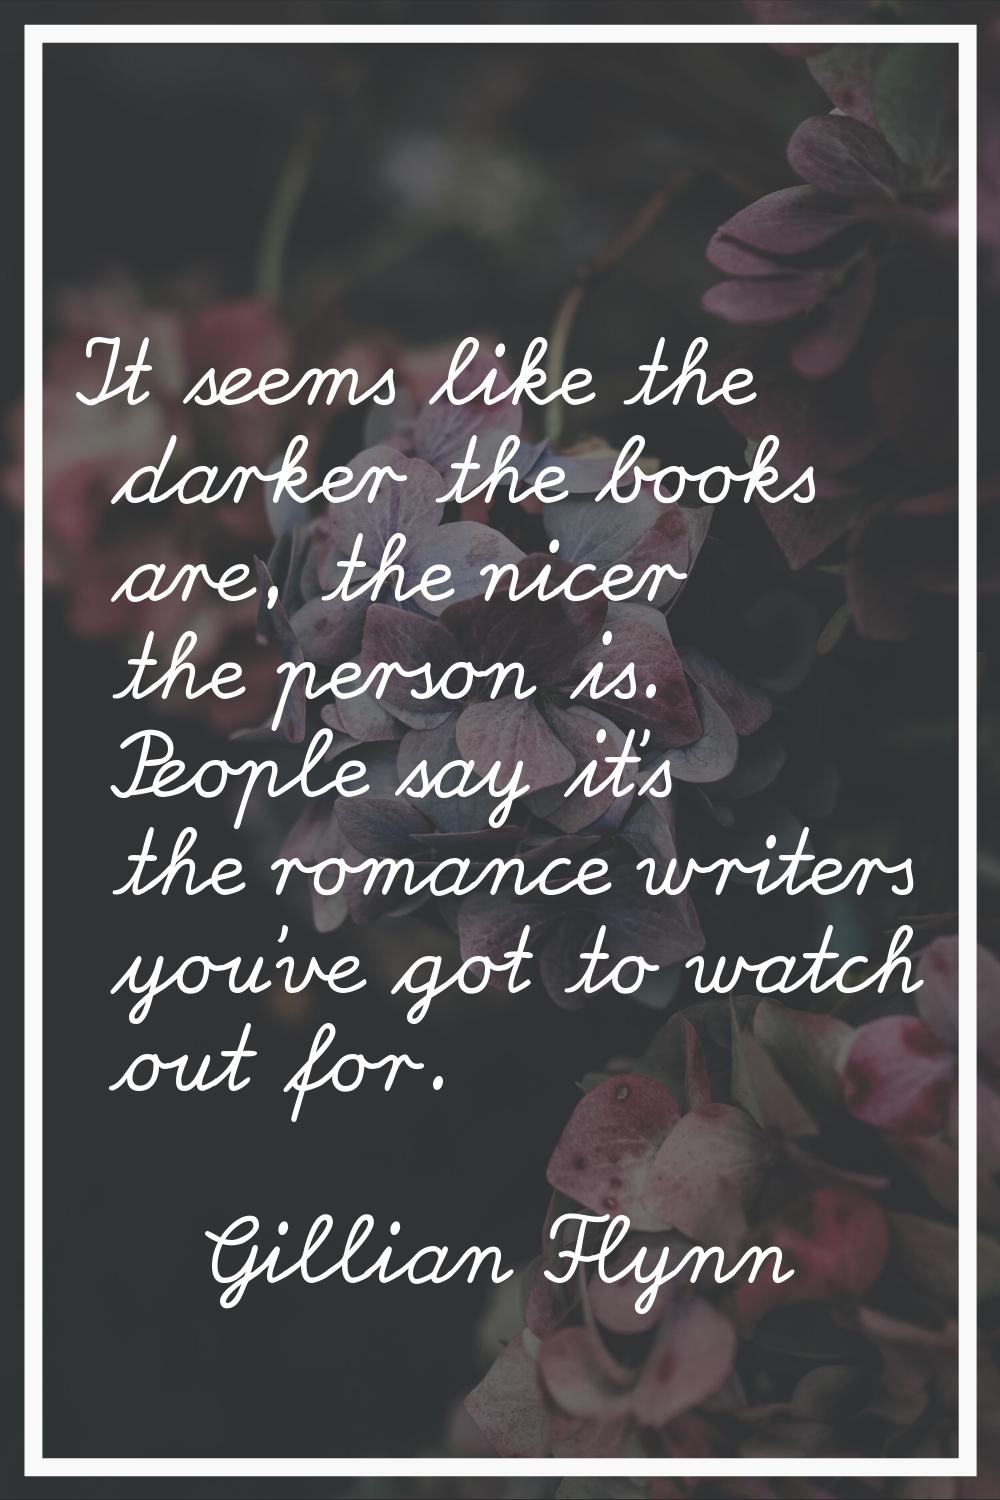 It seems like the darker the books are, the nicer the person is. People say it's the romance writer